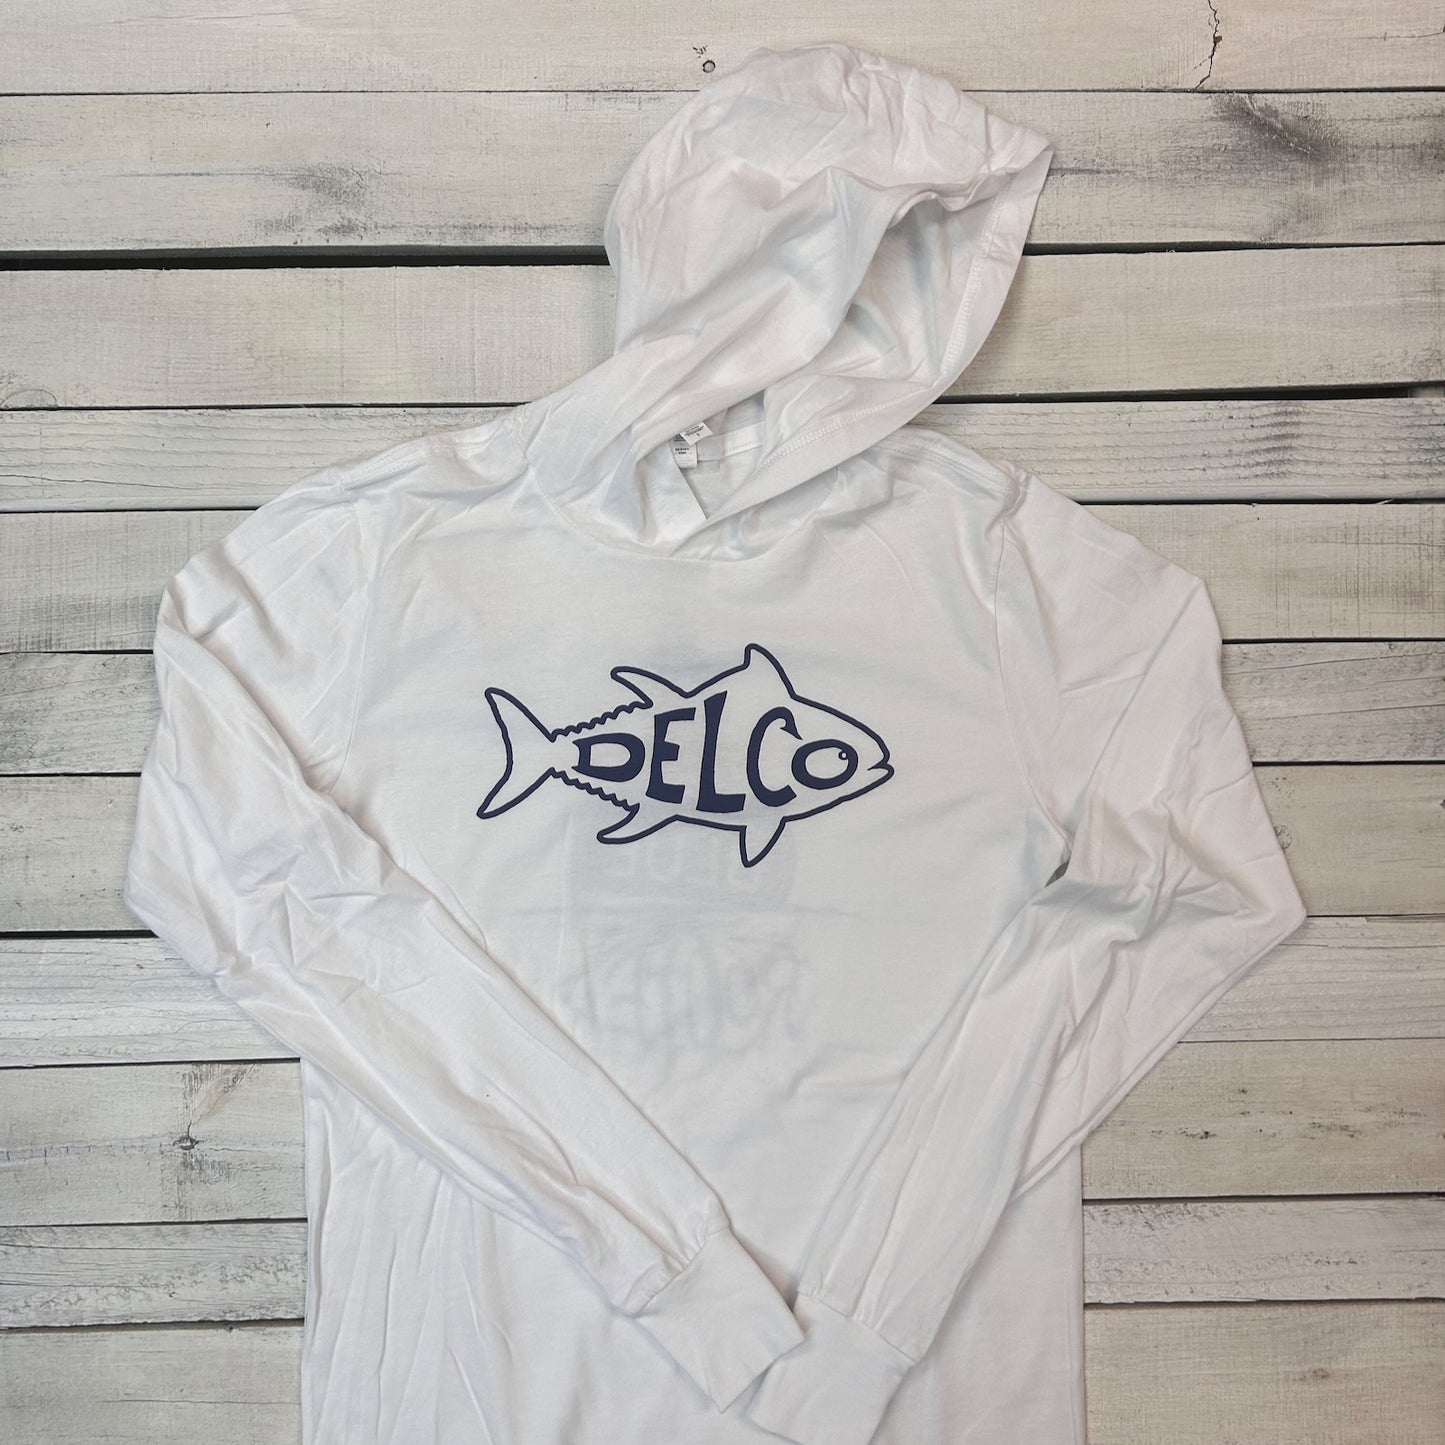 DELCO Tuna White Blue Hooded Long Sleever